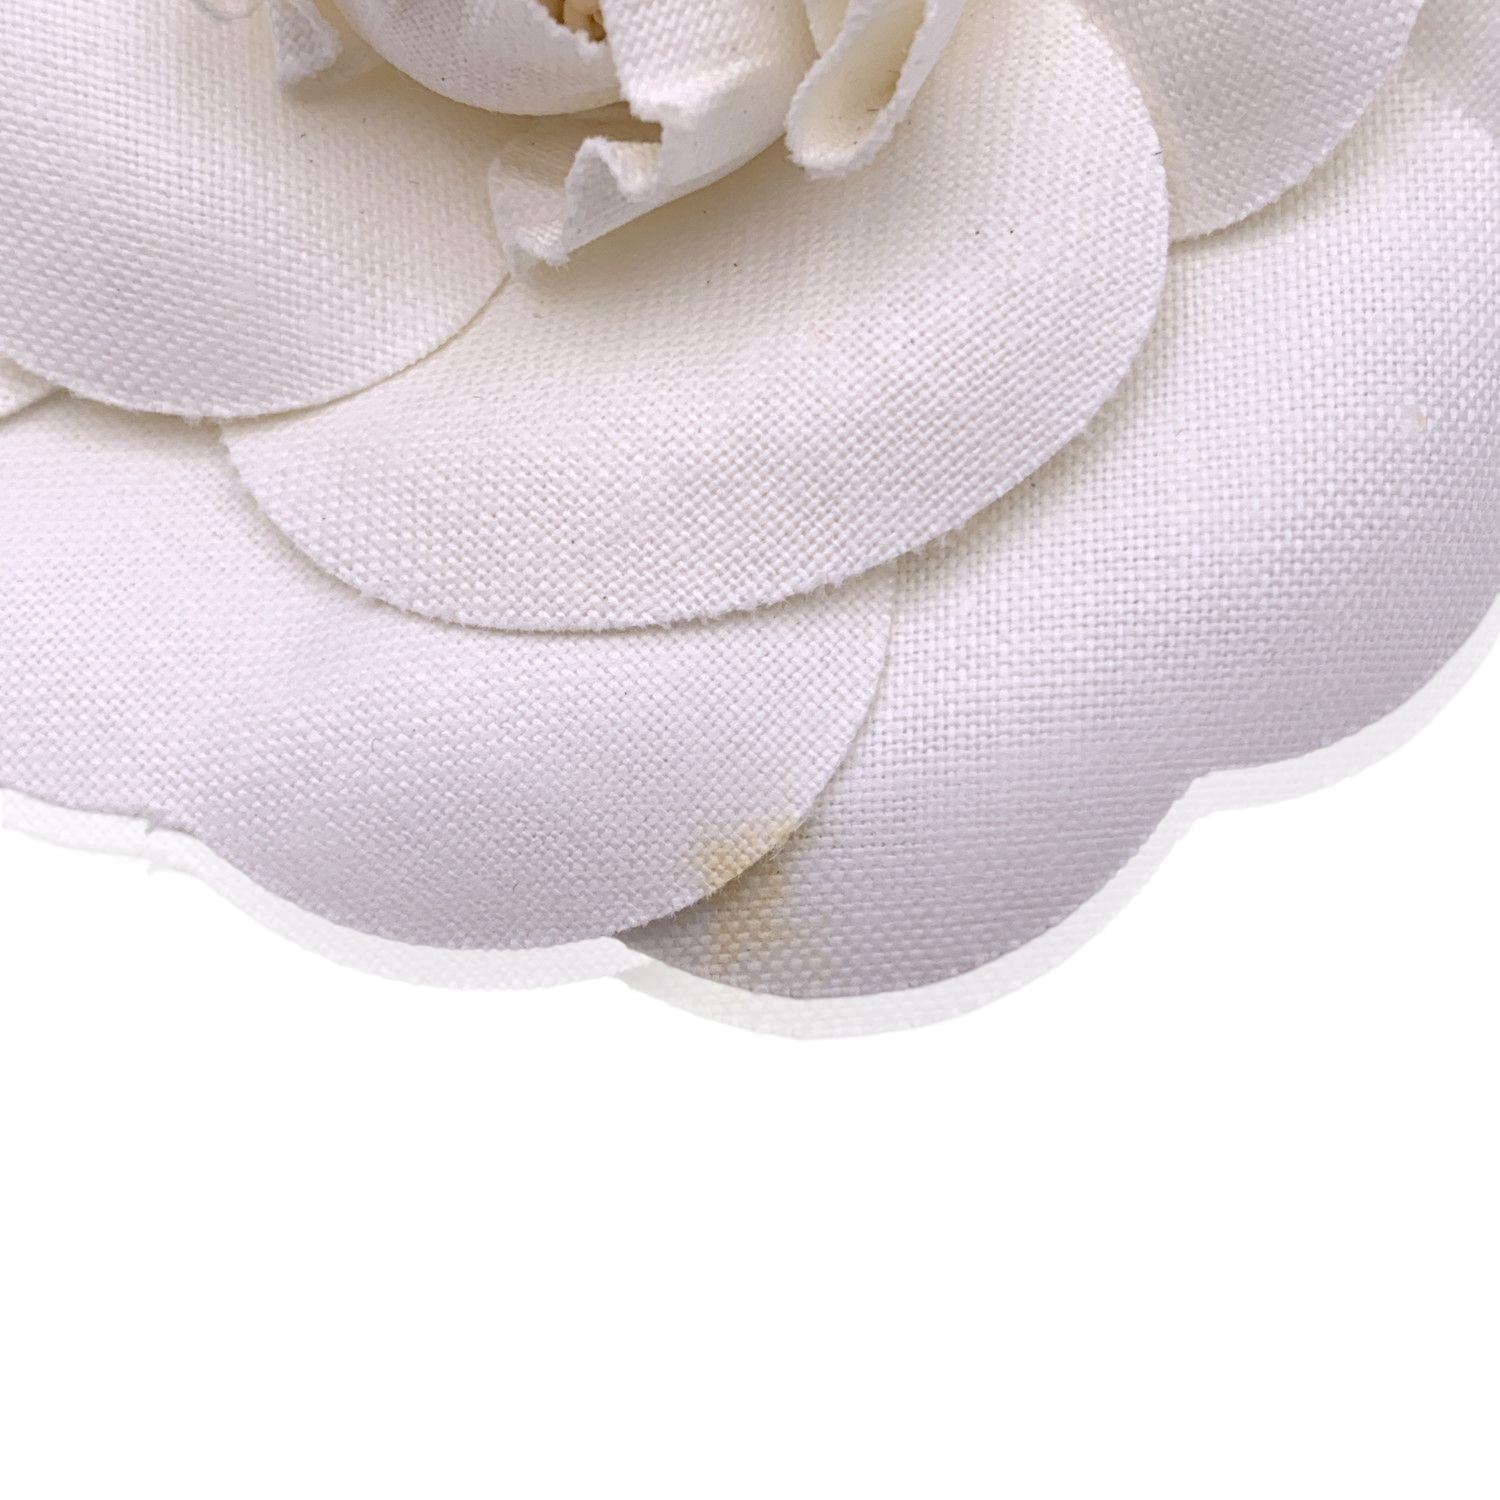 Chanel Vintage Camelia Camellia Flower Pin Brooch. White fabric petals. Safety pin closure. Measurements: diameter: 3.5 inches - 8.9 cm 'CHANEL - CC - Made in France' oval tab on the back

Condition

B - VERY GOOD

Gently used. A couple of light